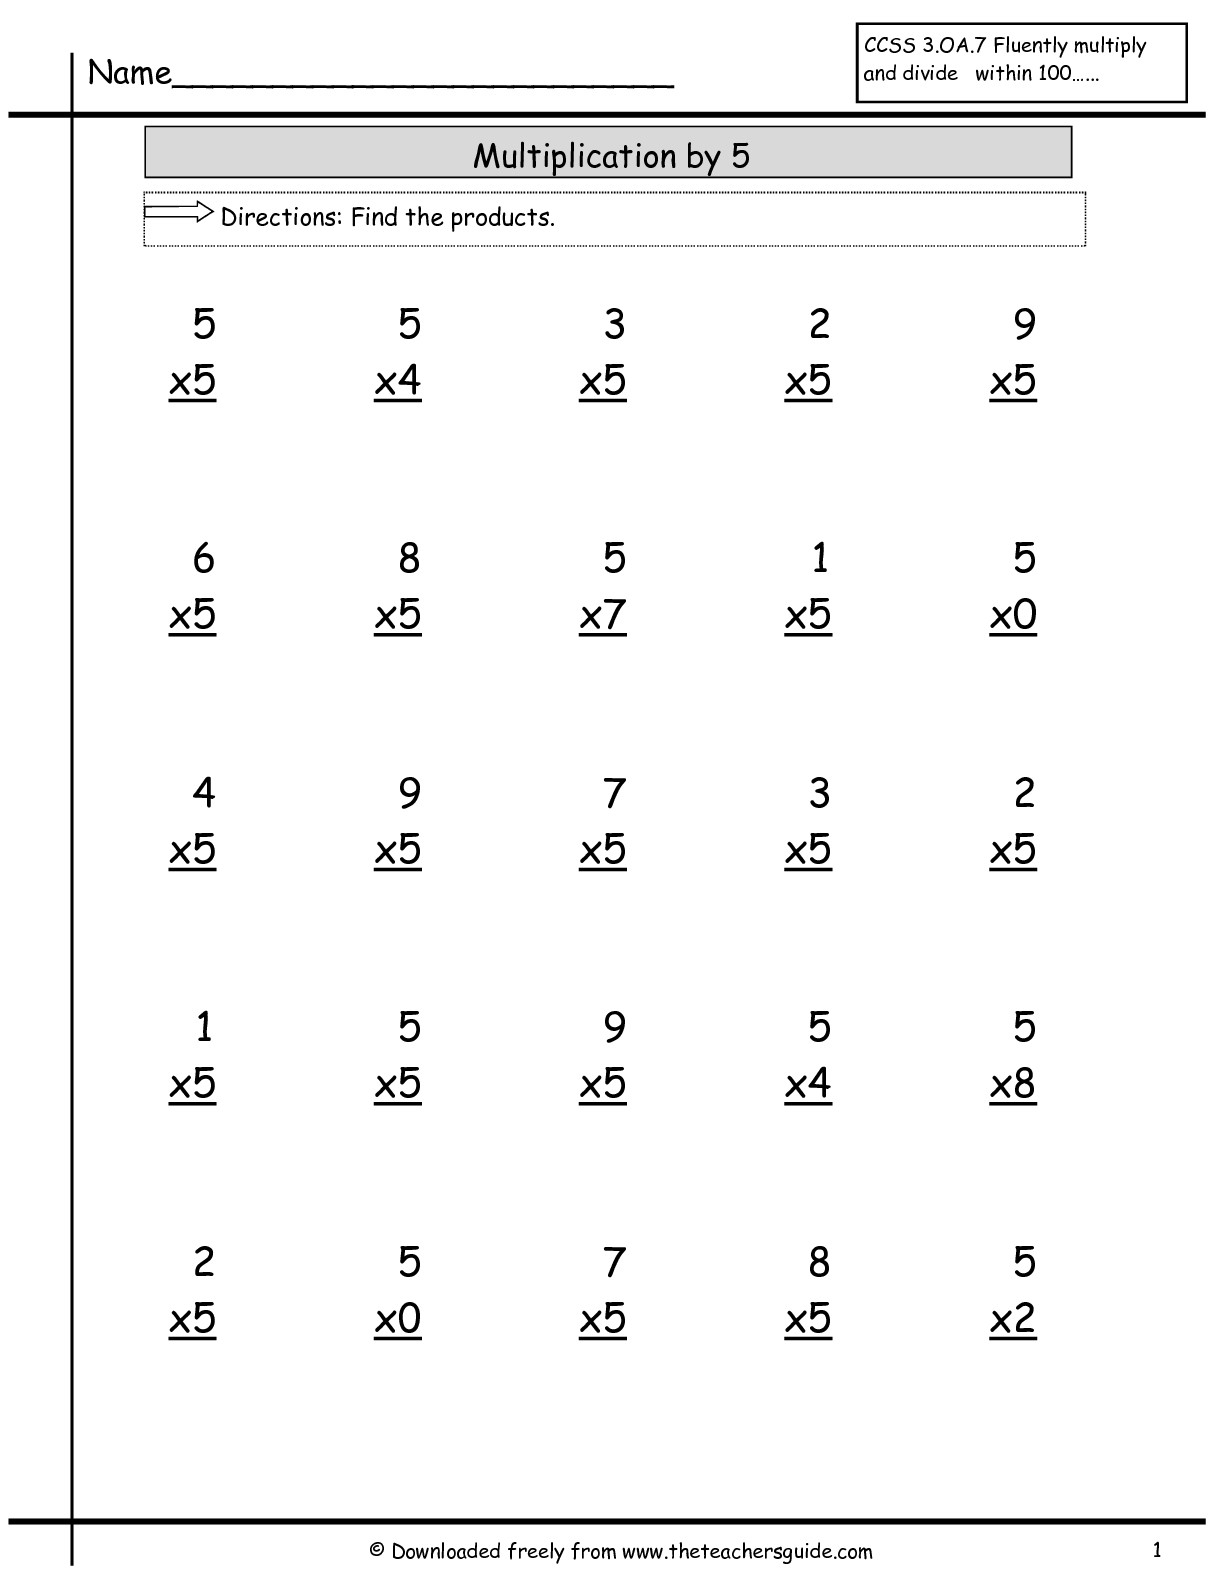 Multiplication Facts Worksheets From The Teacher&amp;#039;s Guide with regard to Multiplication Worksheets Number 2